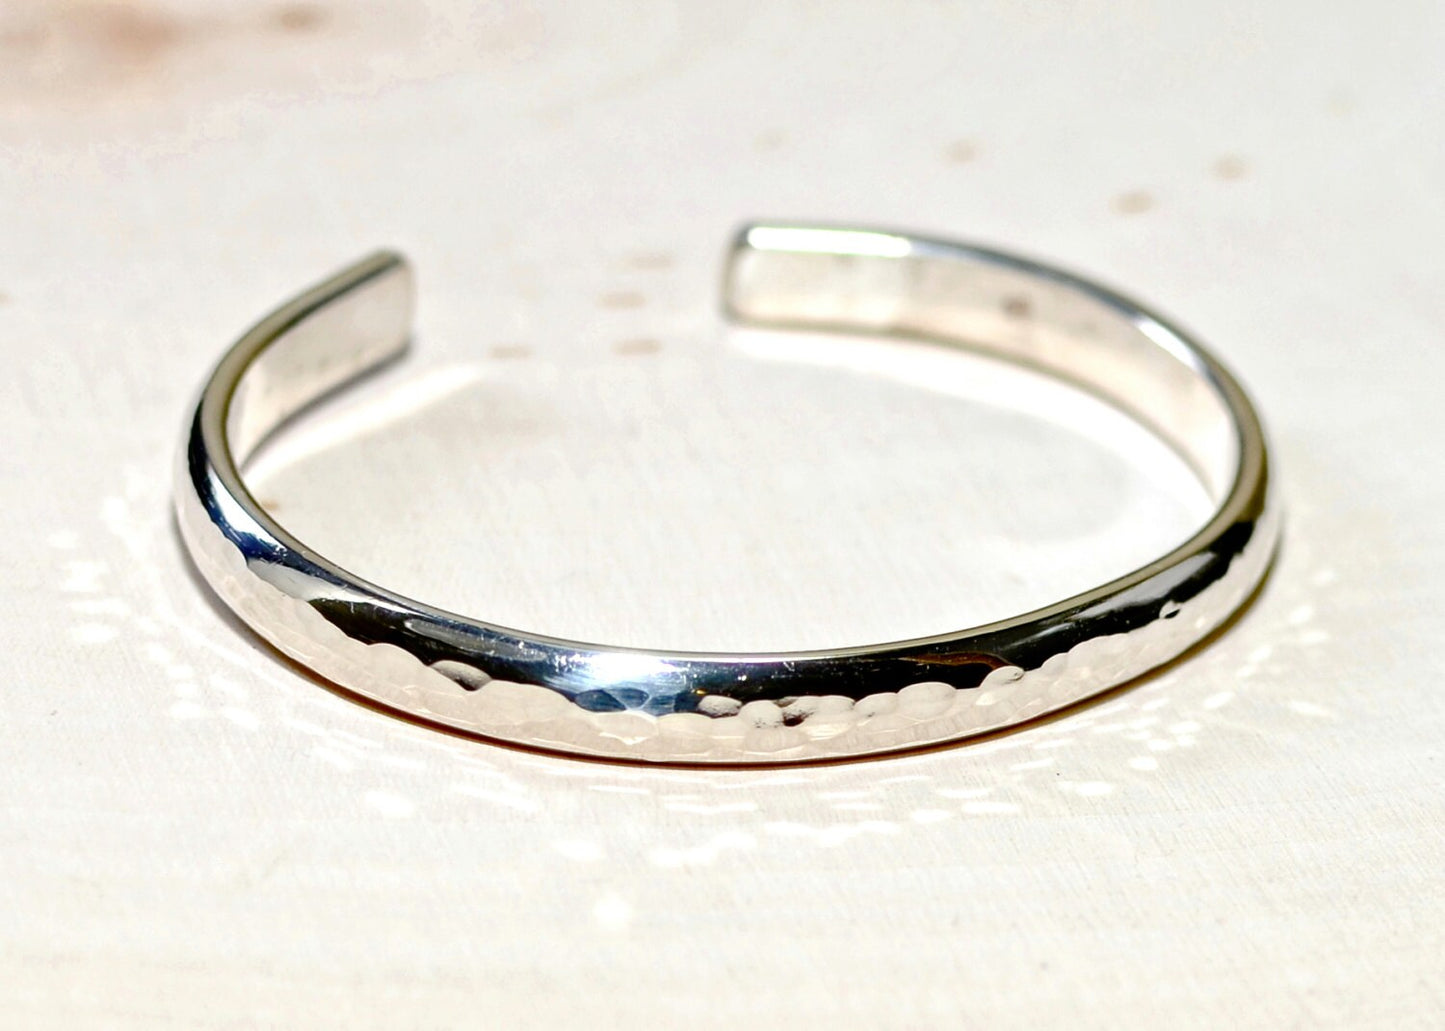 Sterling silver half round bracelet with hammered texture and mirror finish